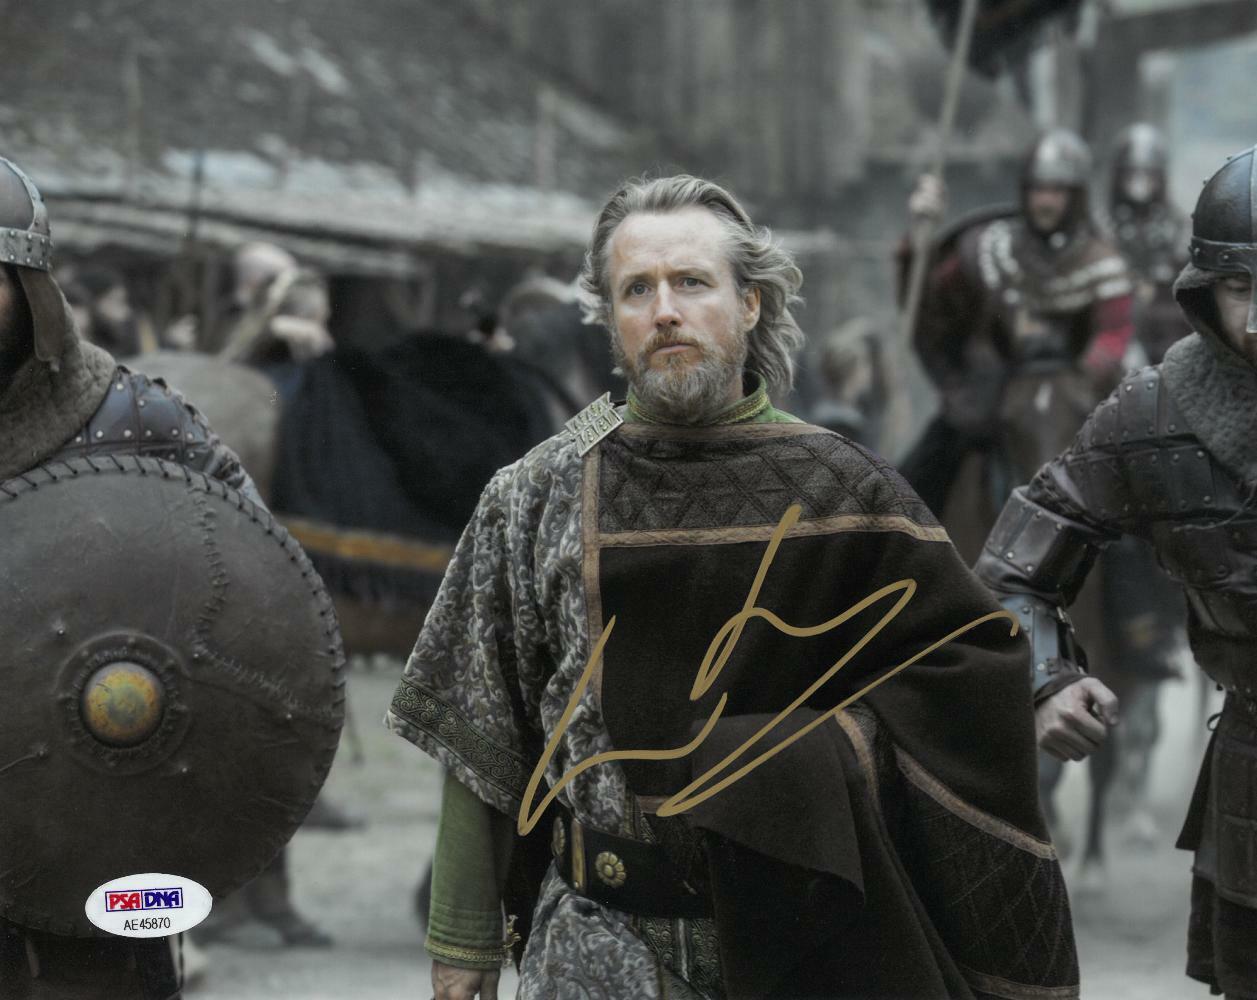 Linus Roache Signed Vikings Authentic Autographed 8x10 Photo Poster painting PSA/DNA #AE45870